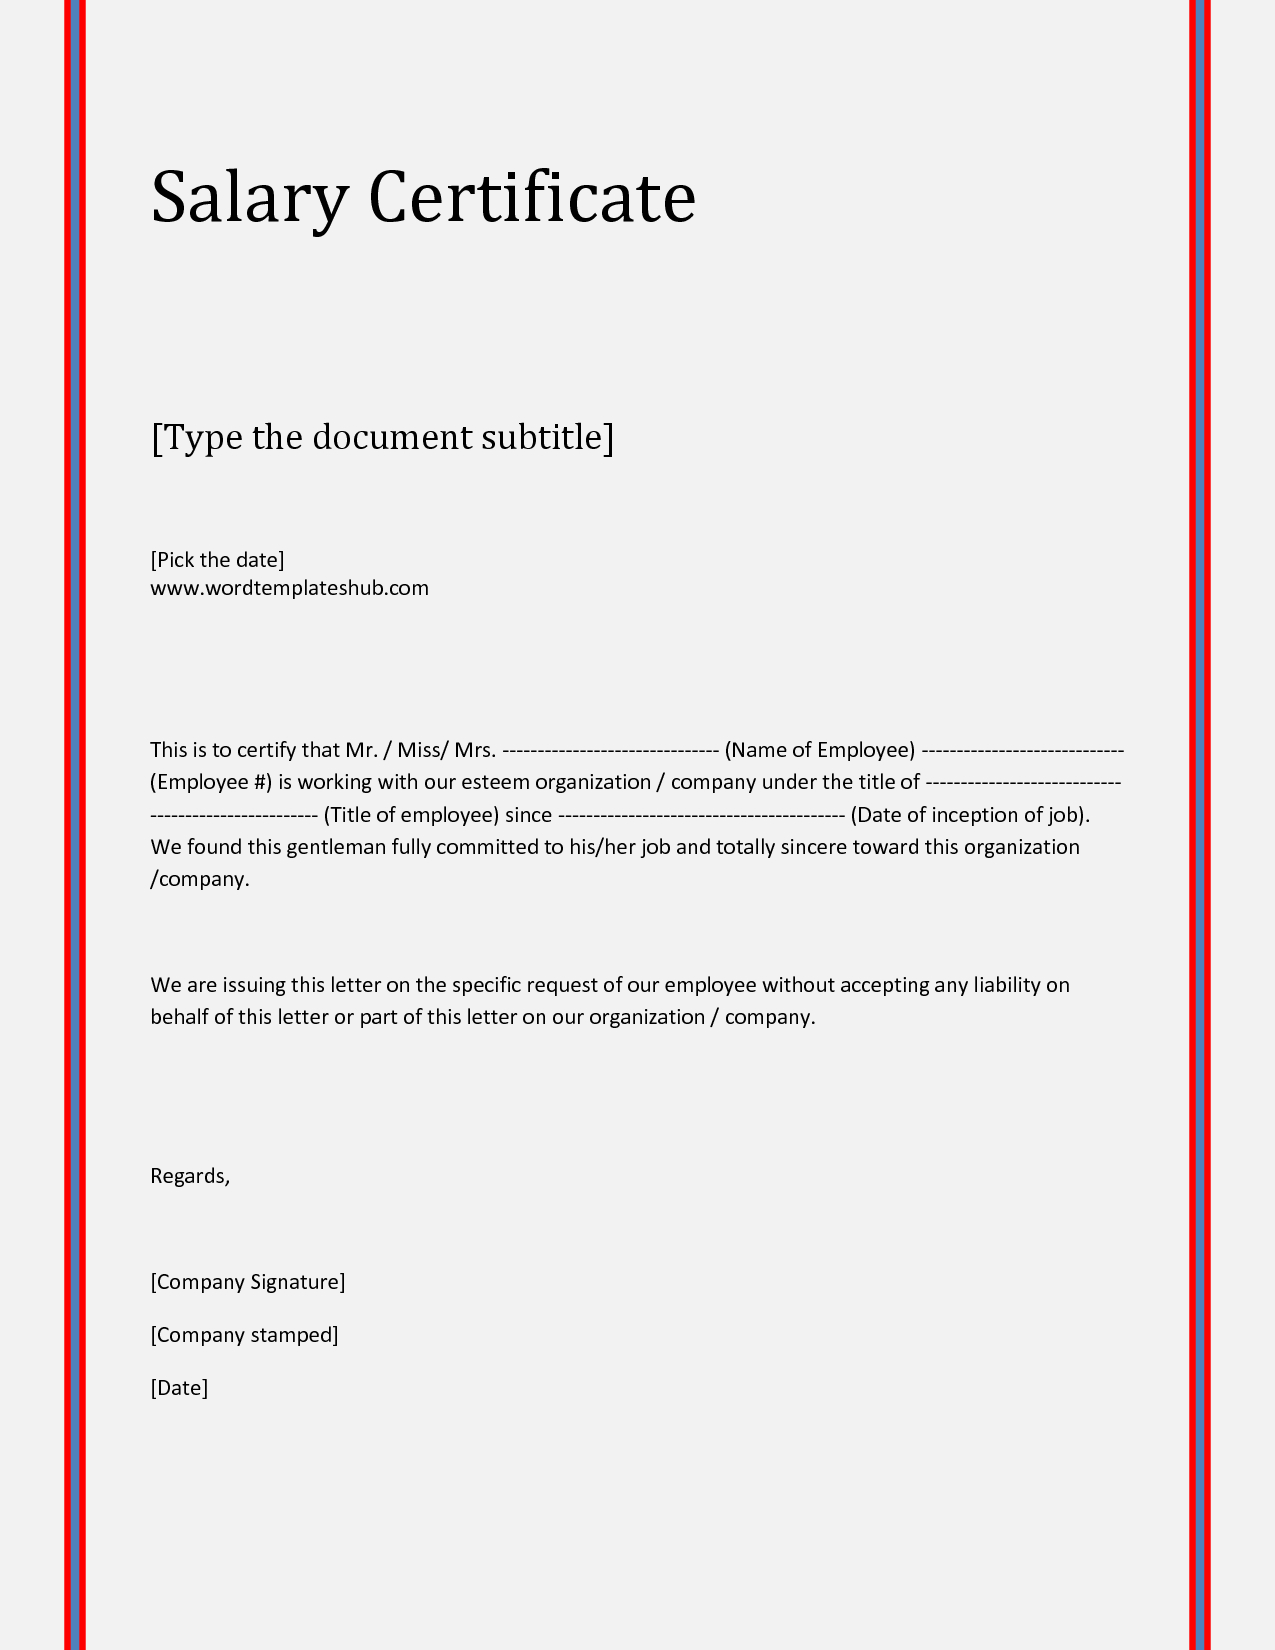 Request Letter For Certificate Employment Nurses Cover Proof For Template Of Certificate Of Employment